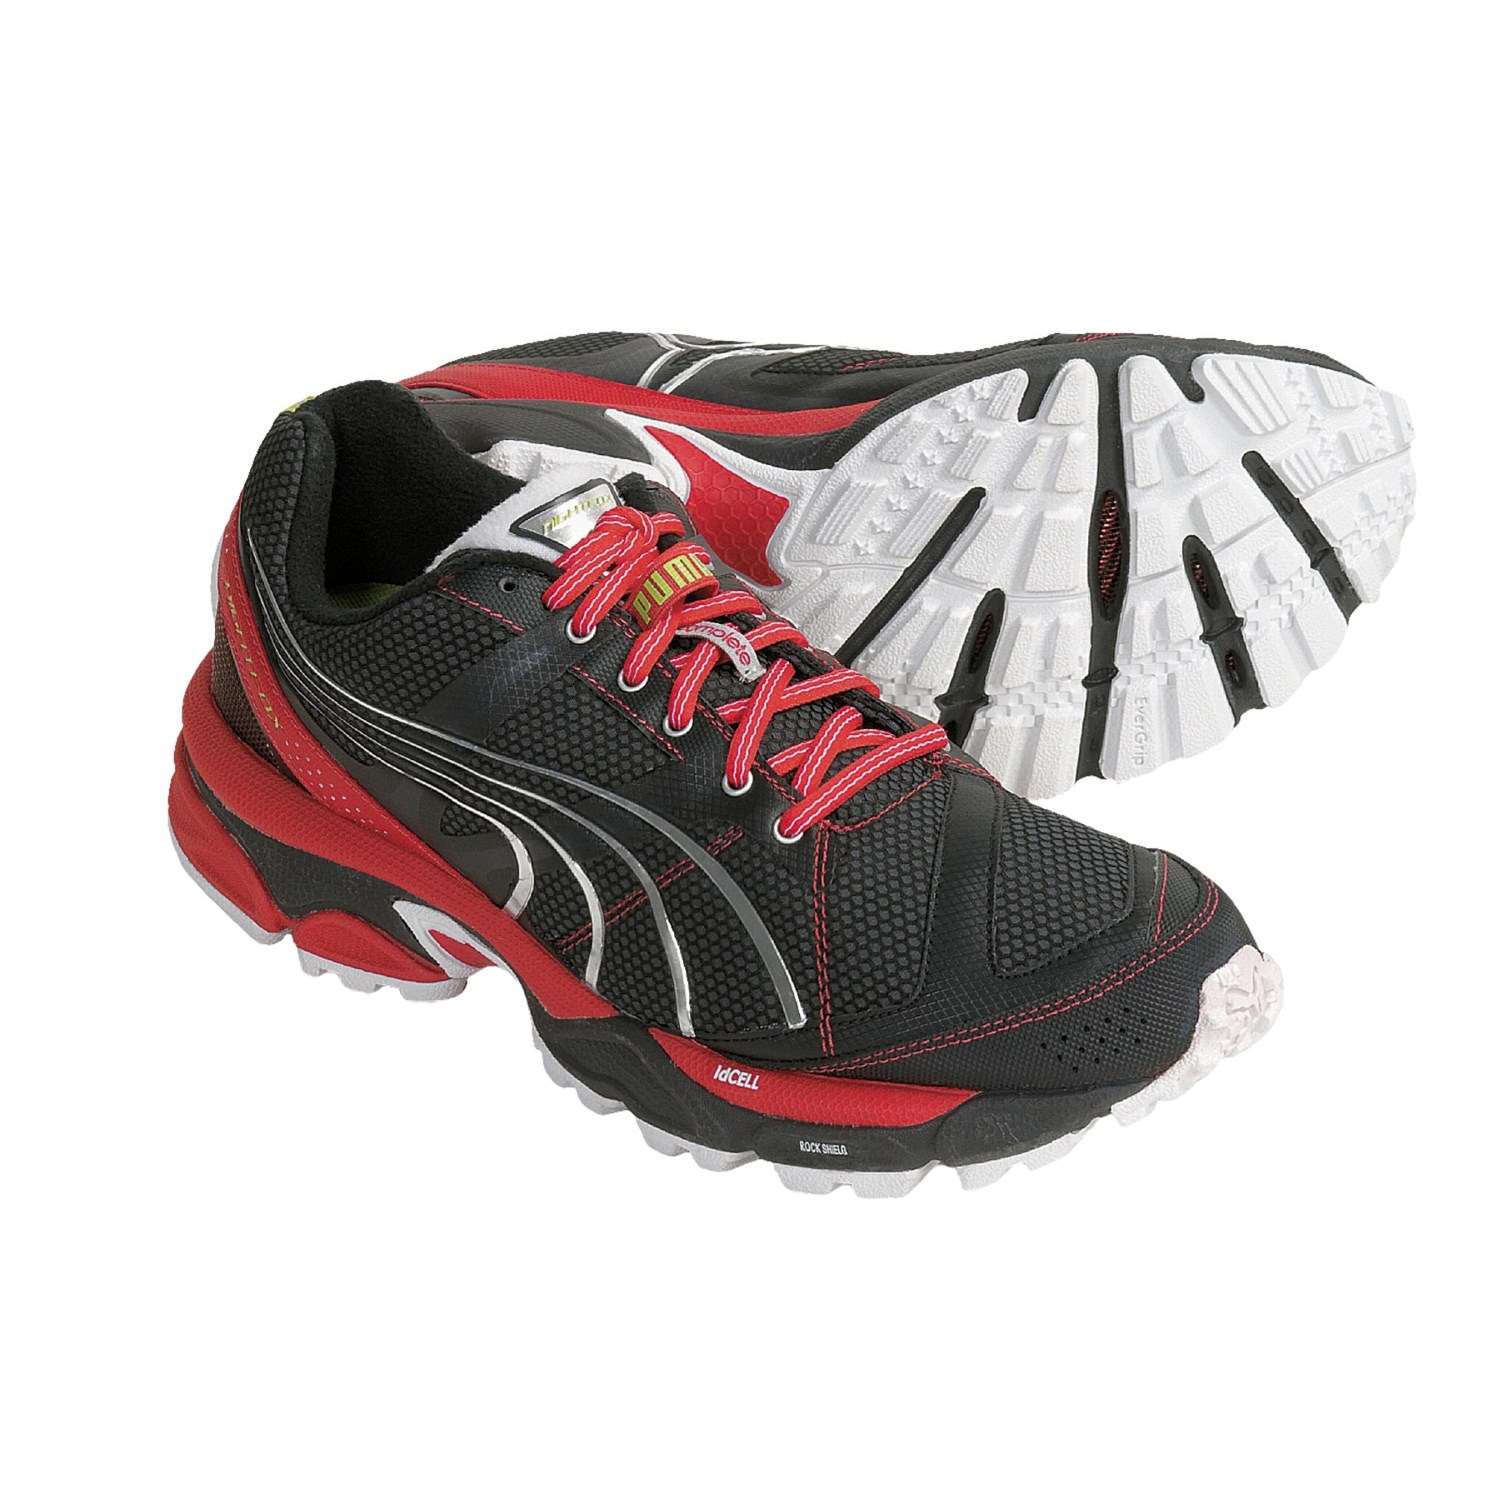 Puma Complete Nightfox Trail Running Shoes (For Men) 3489R - Save 29%